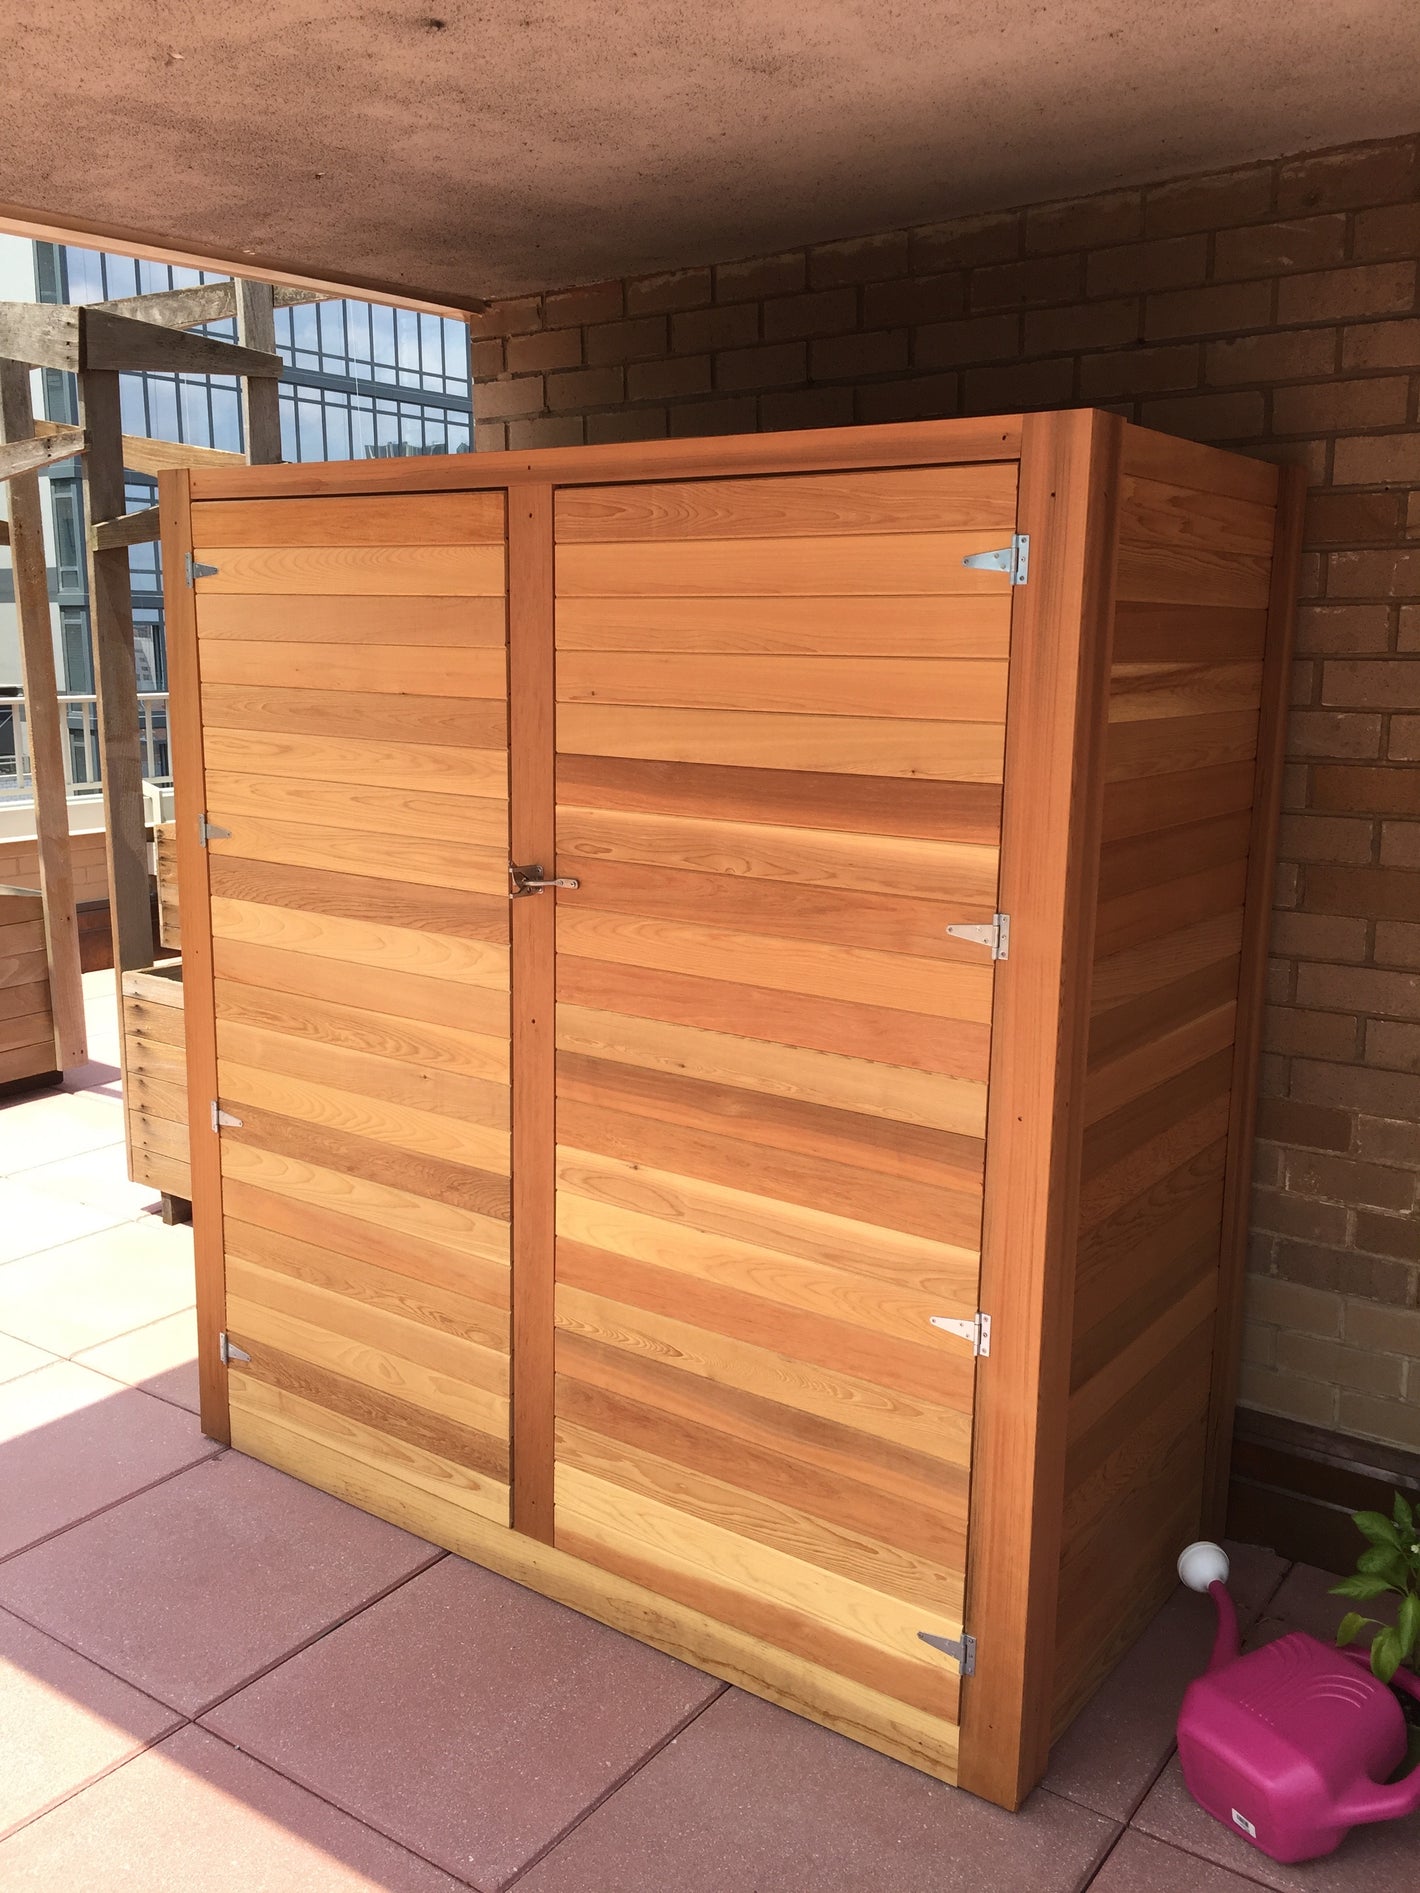 Outdoor wood storage unit created by TCSC